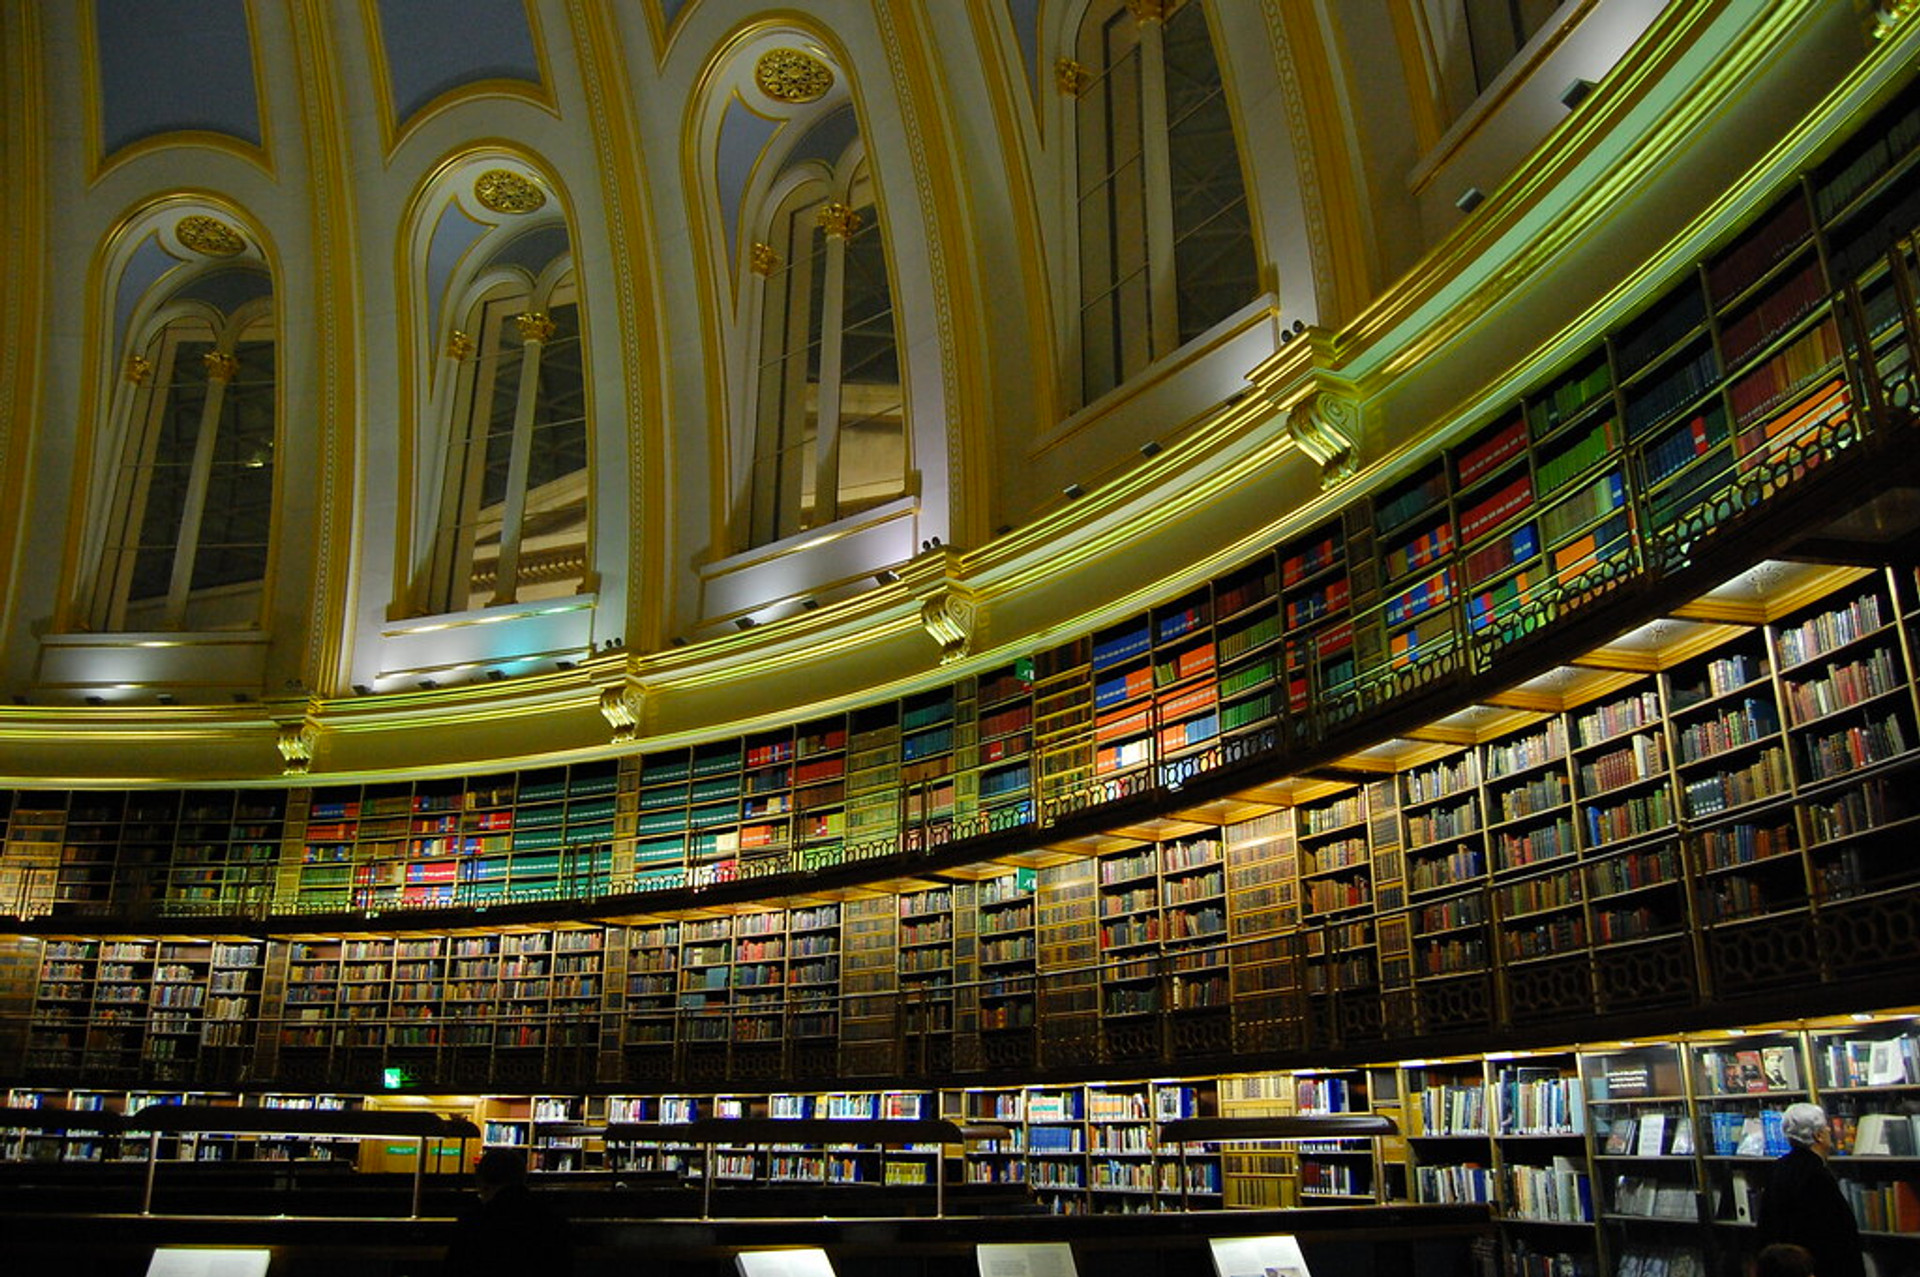 An image of the reading room at the British Library, featuring thousands of books on shelves within a domed structure.